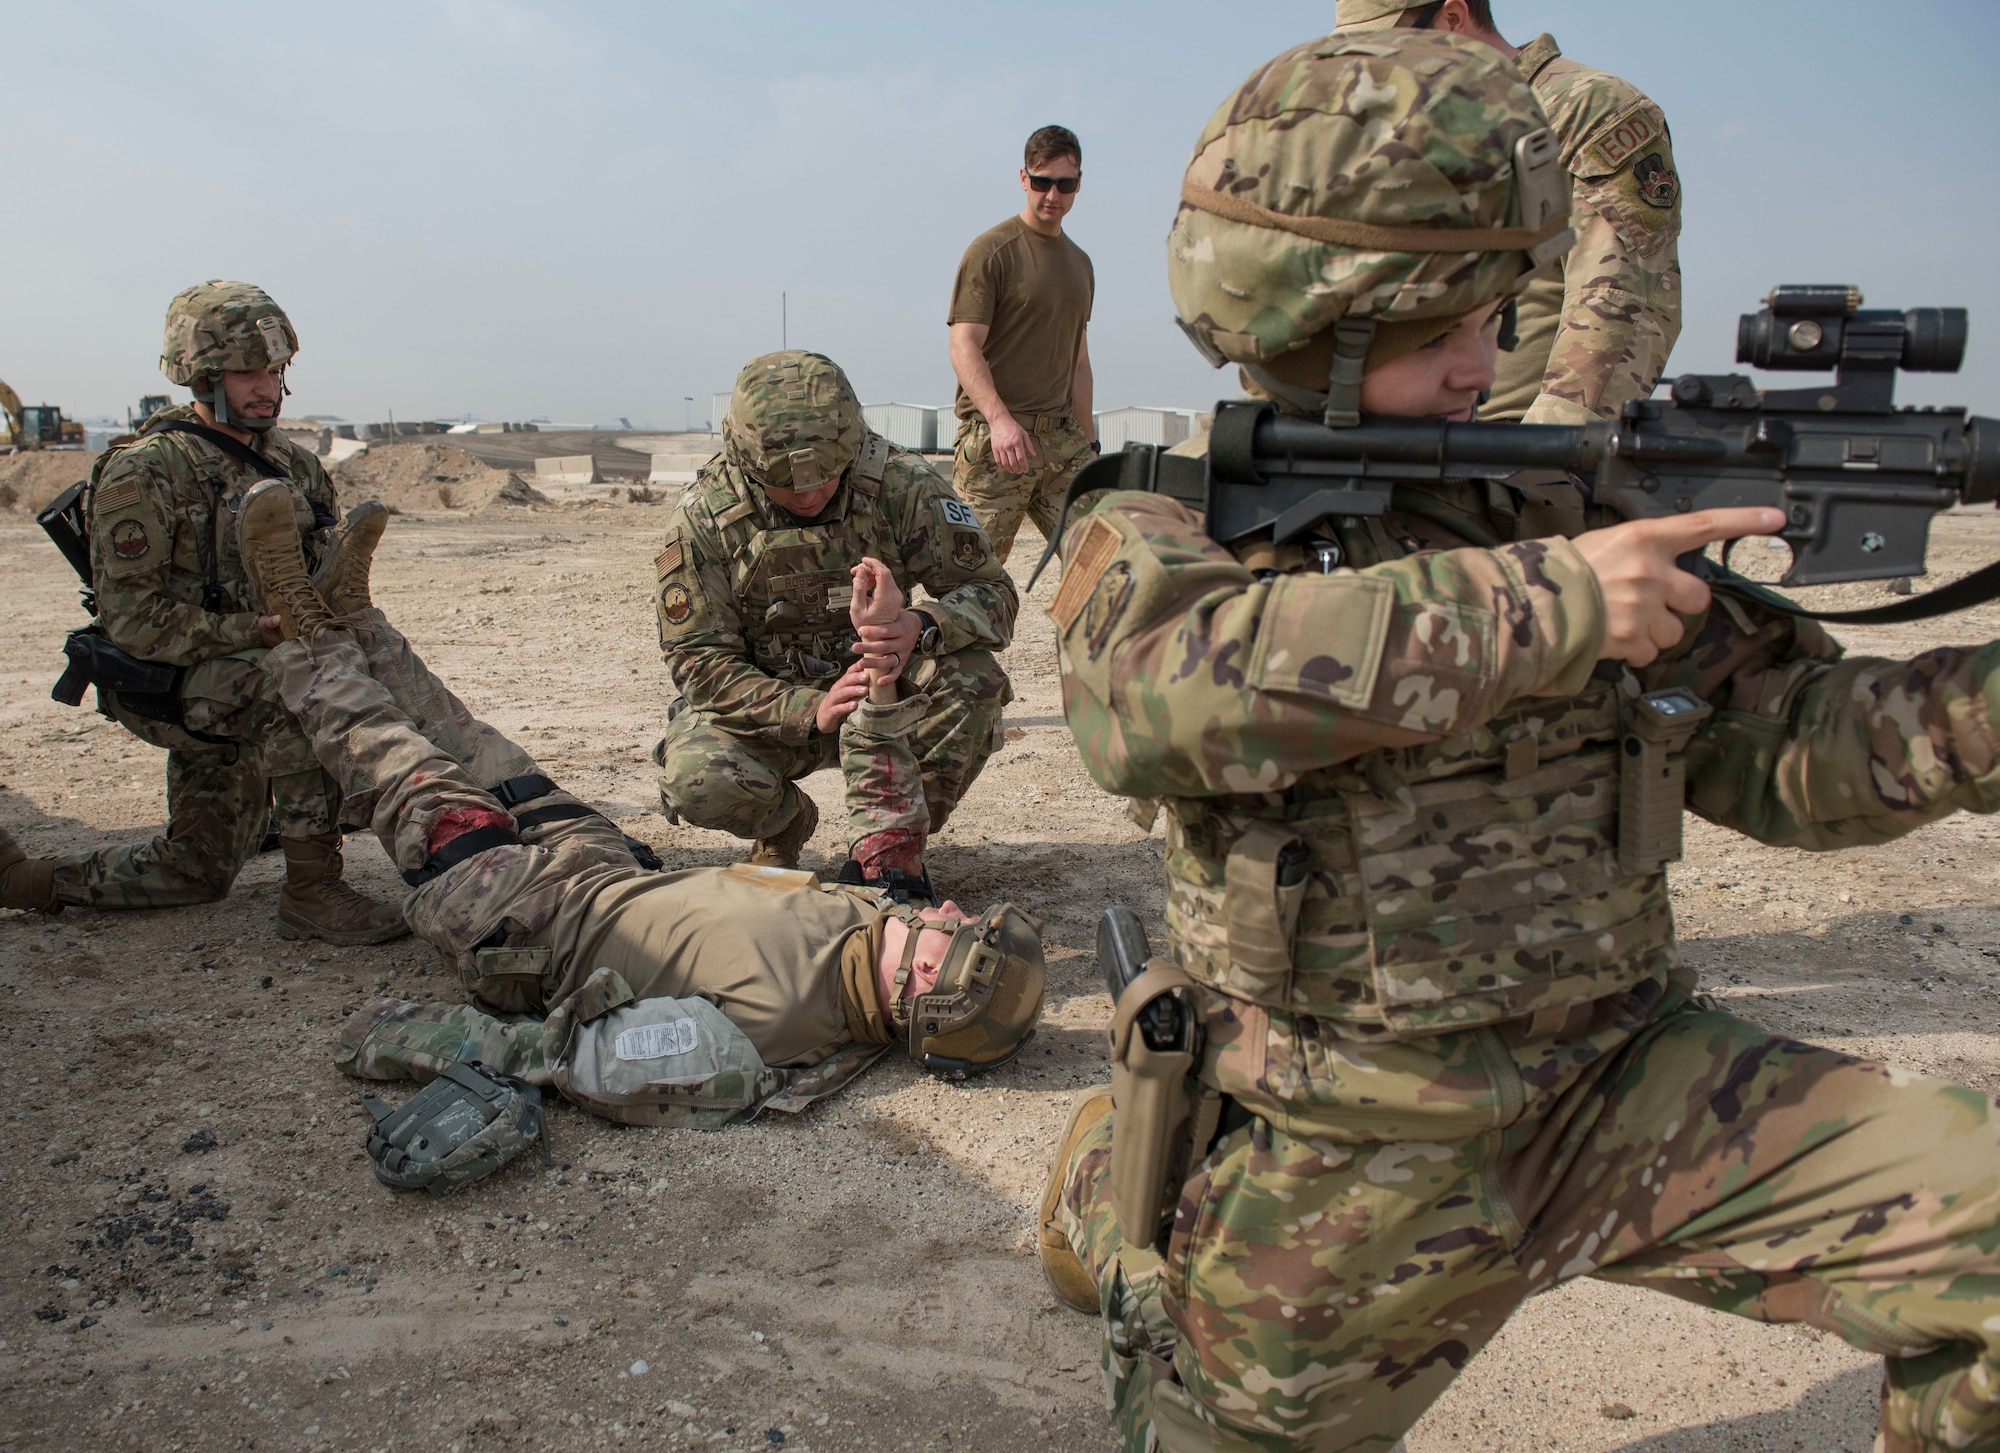 U.S. Air Force Airmen assigned to the 386th Expeditionary Security Forces Squadron work together to provide aid to a mock victim during an improvised explosive device and unexploded ordnance familiarization course at Ali Al Salem Air Base, Kuwait, Dec. 2, 2020.